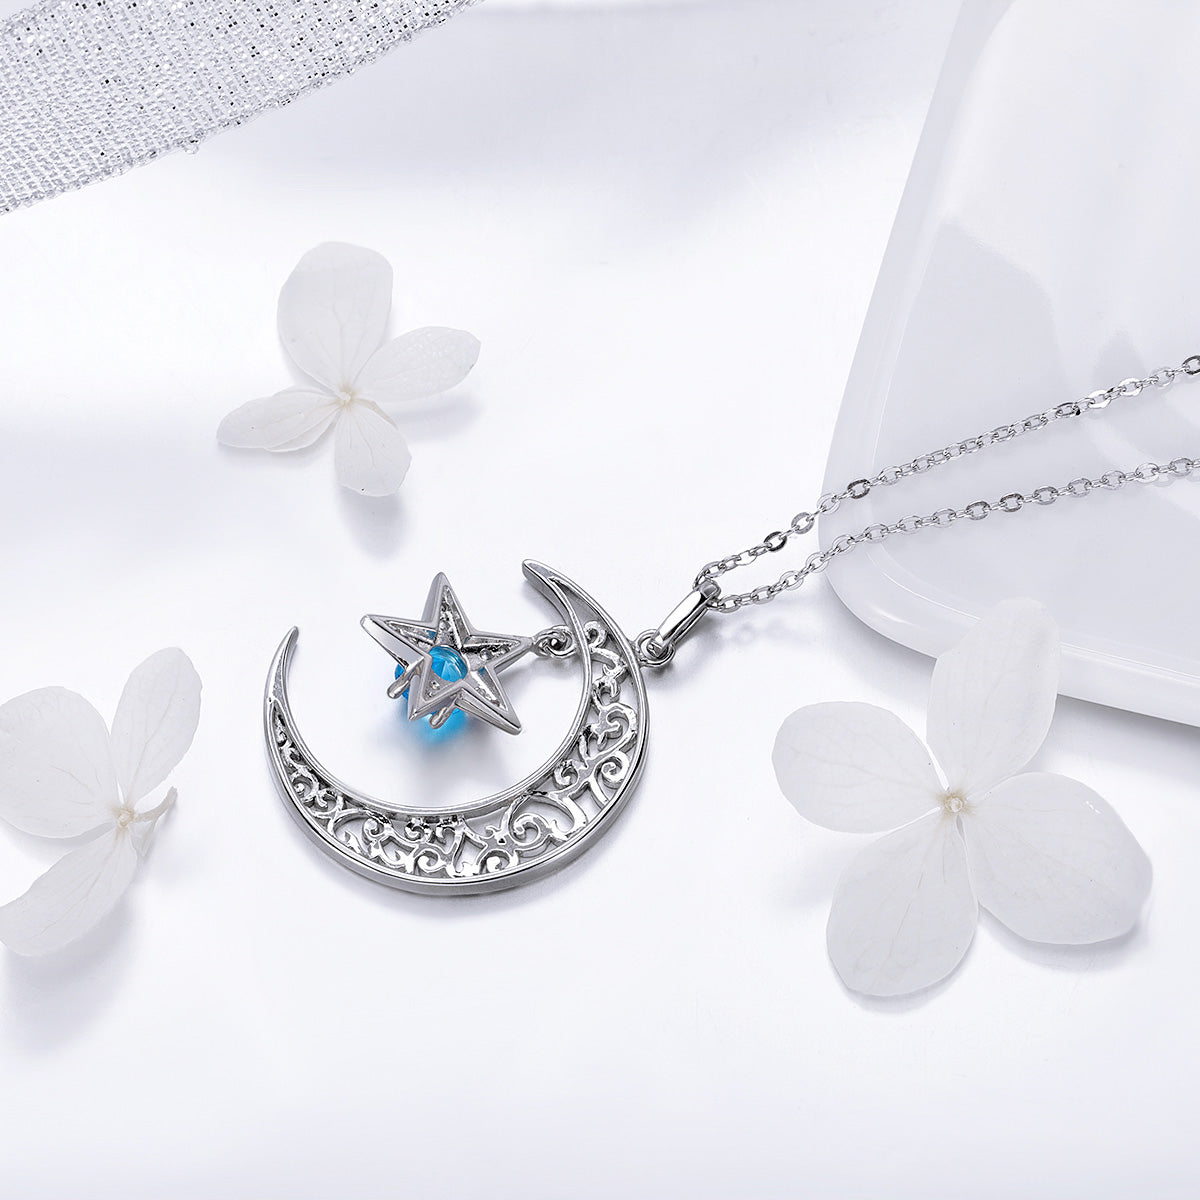 Sterling Silver Delicate Moon & Star Hypoallergenic Necklace